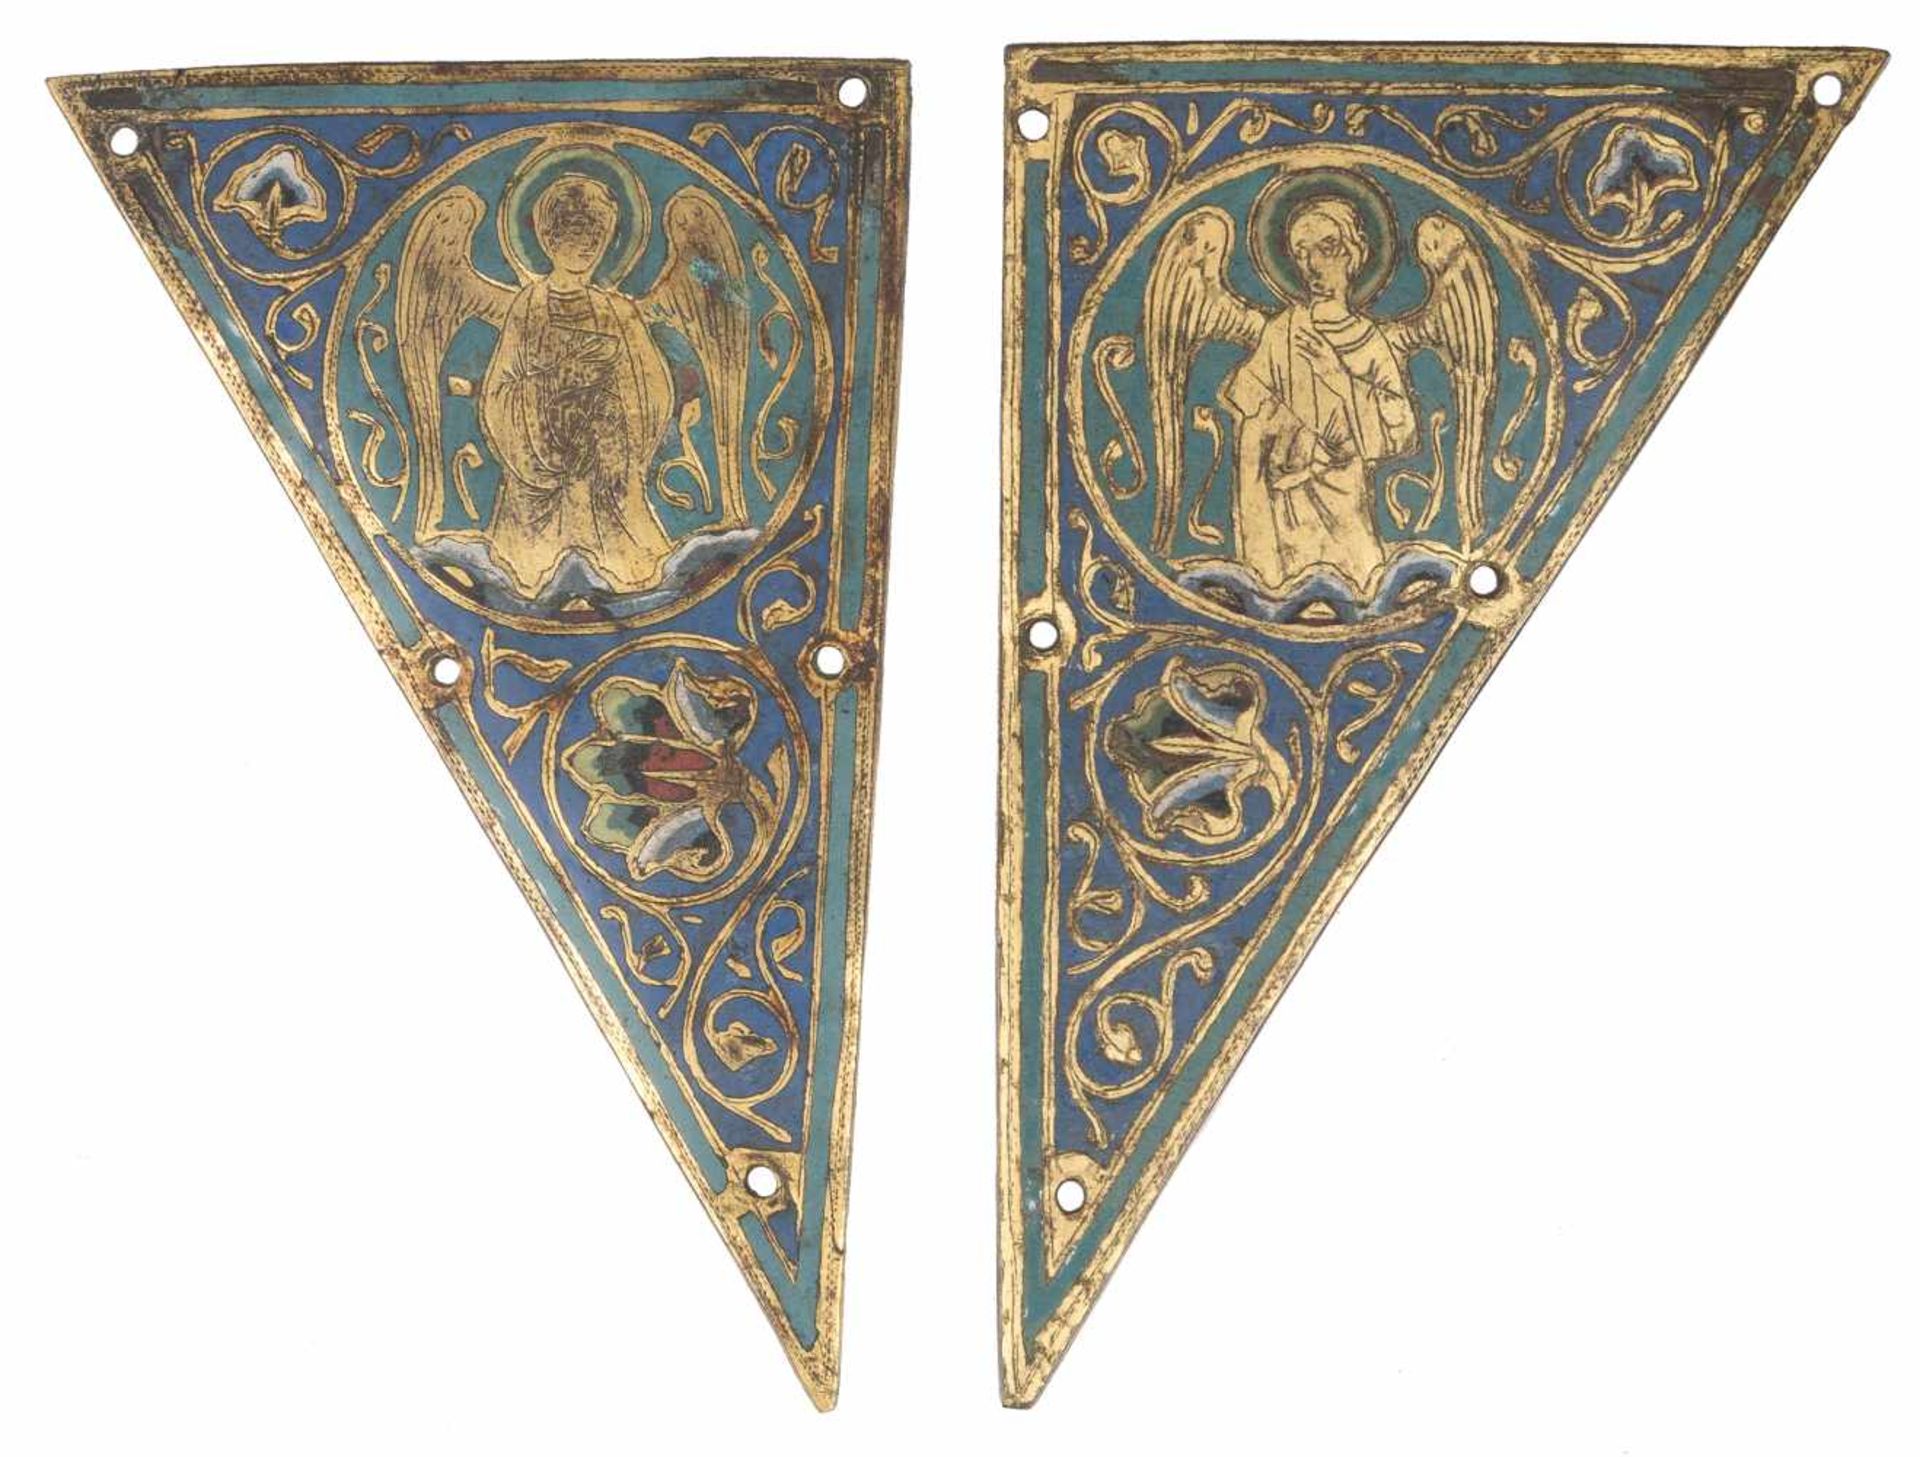 Two gilded and chased copper plaques with champlevé enamel. Limoges. France. Romanesque. Circa